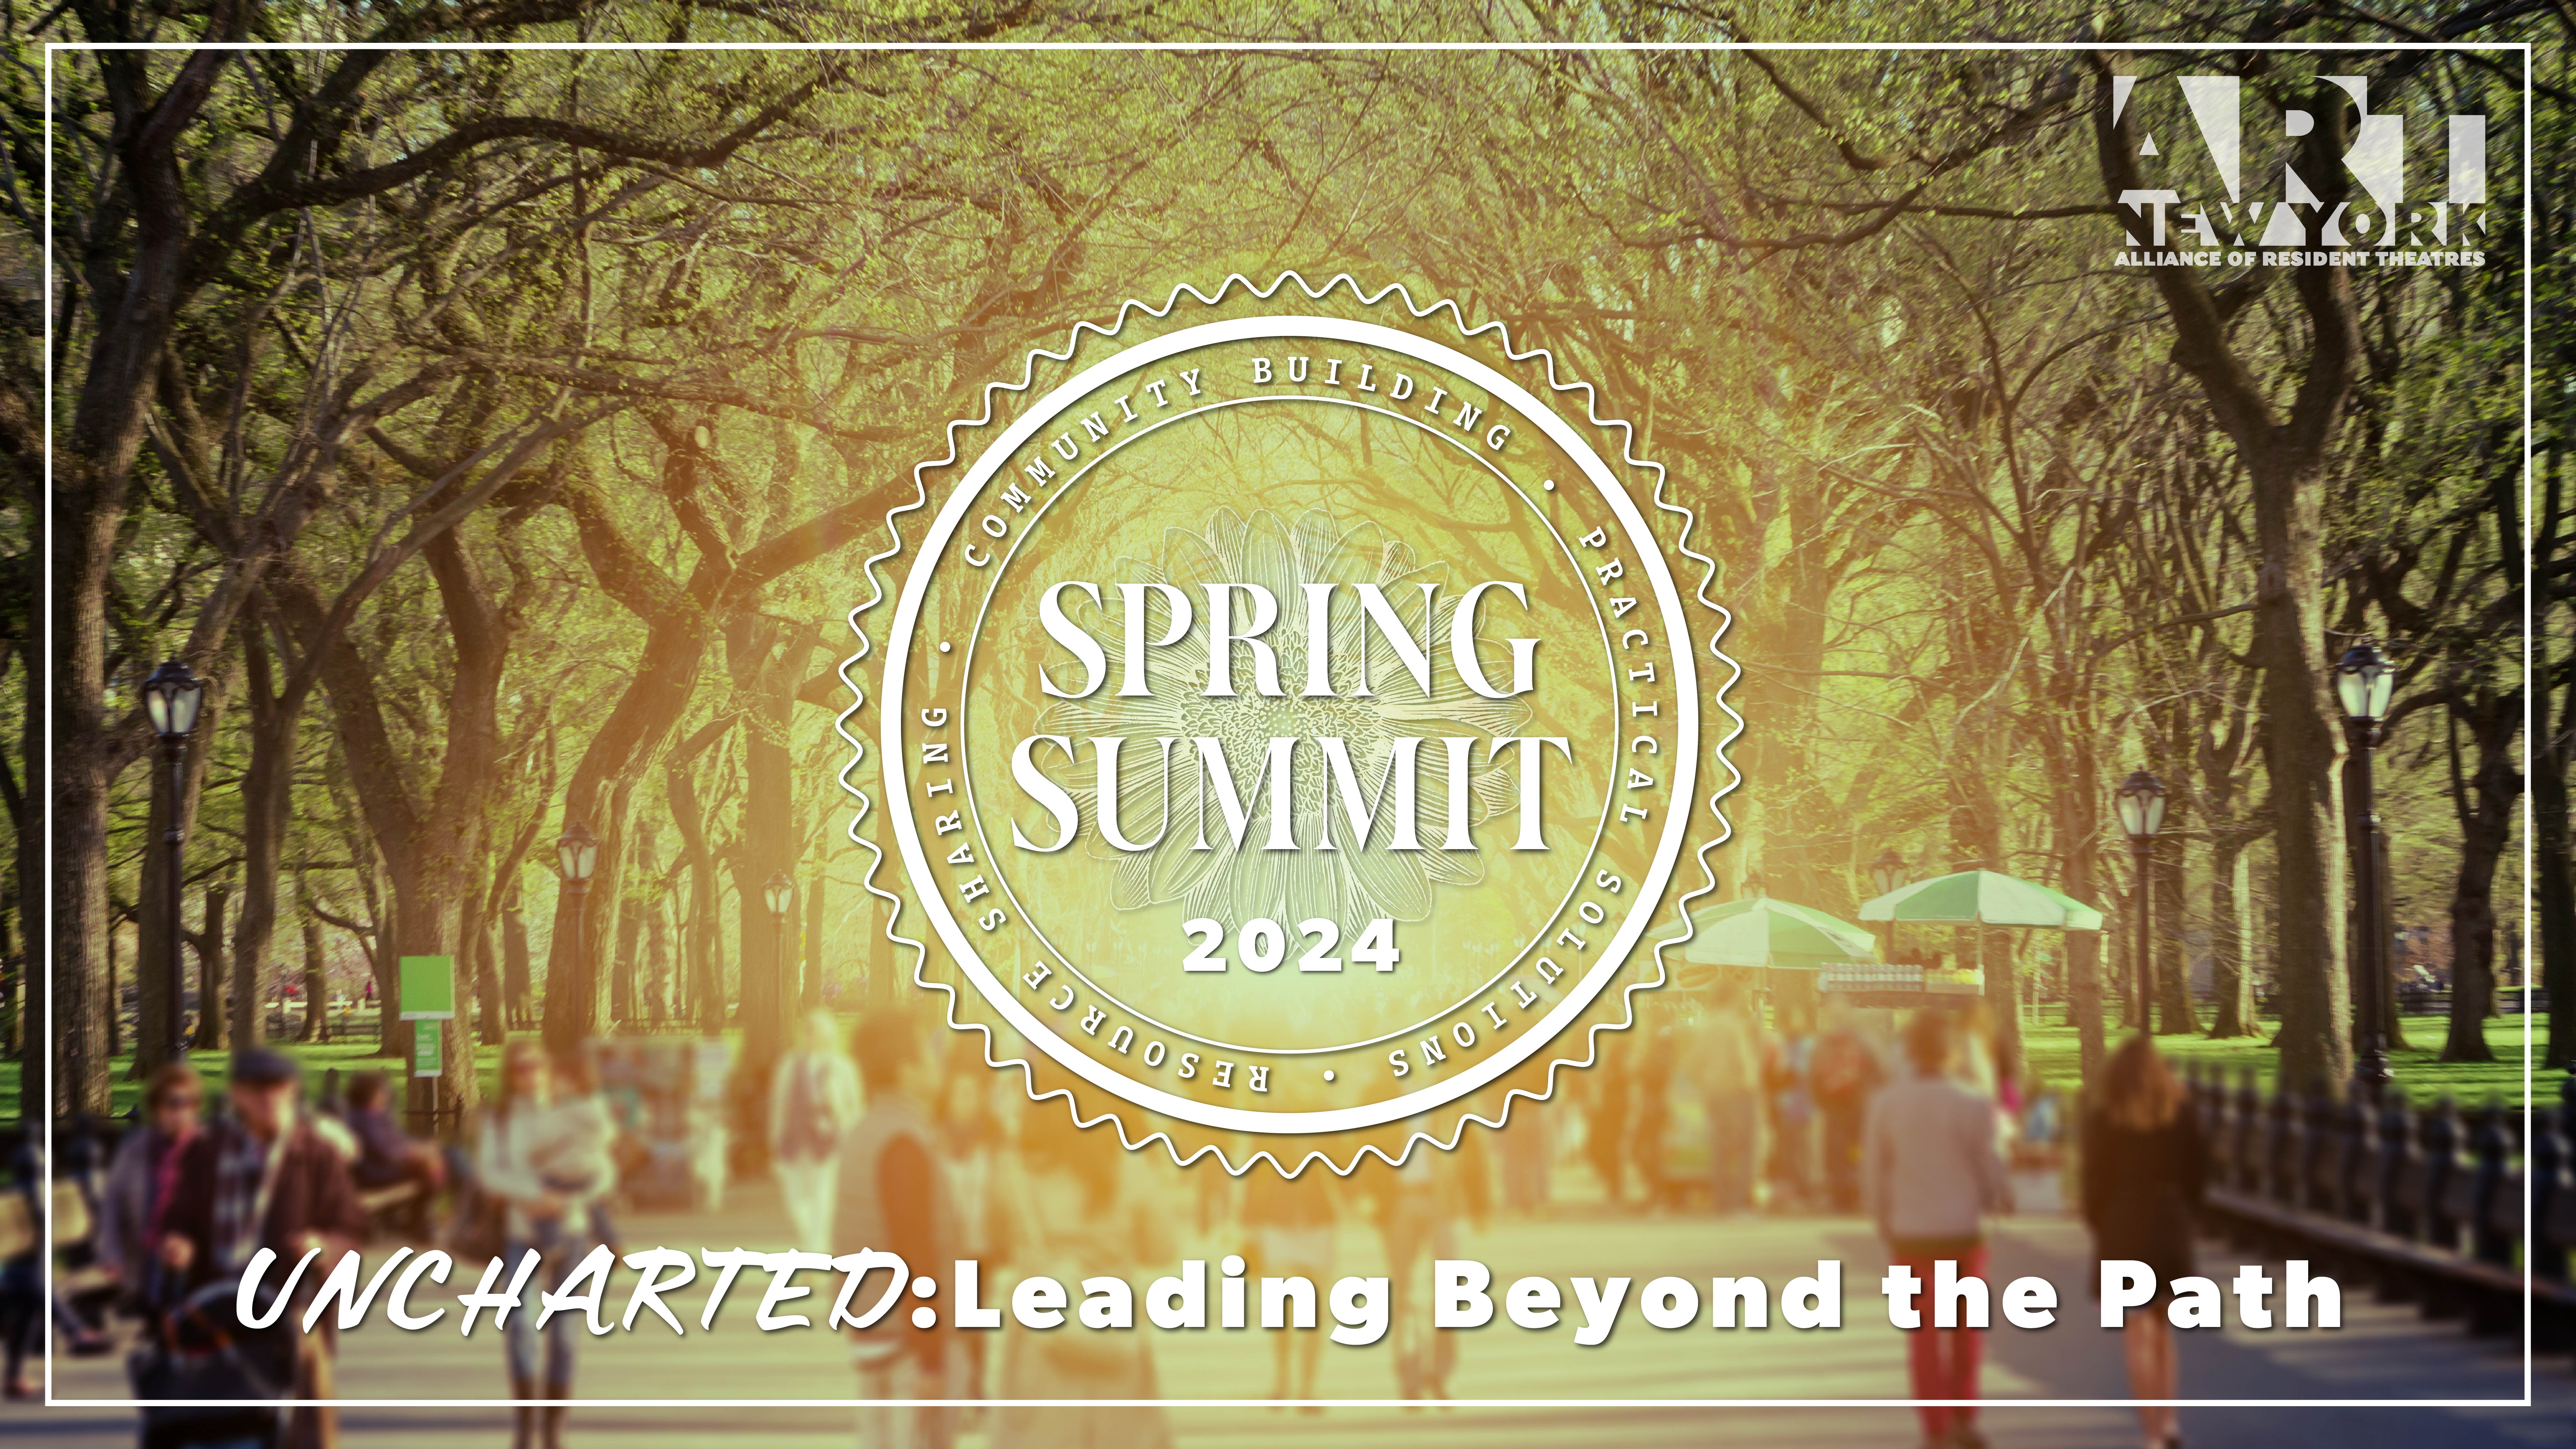 n image of a group of people walking through a park. It is a sunny afternoon day. Center of image is the Spring Summit shield Logo in white text. In right corner is Art New York logo in white text. Layered on top of image is text that reads Uncharted Leading Beyond the Path